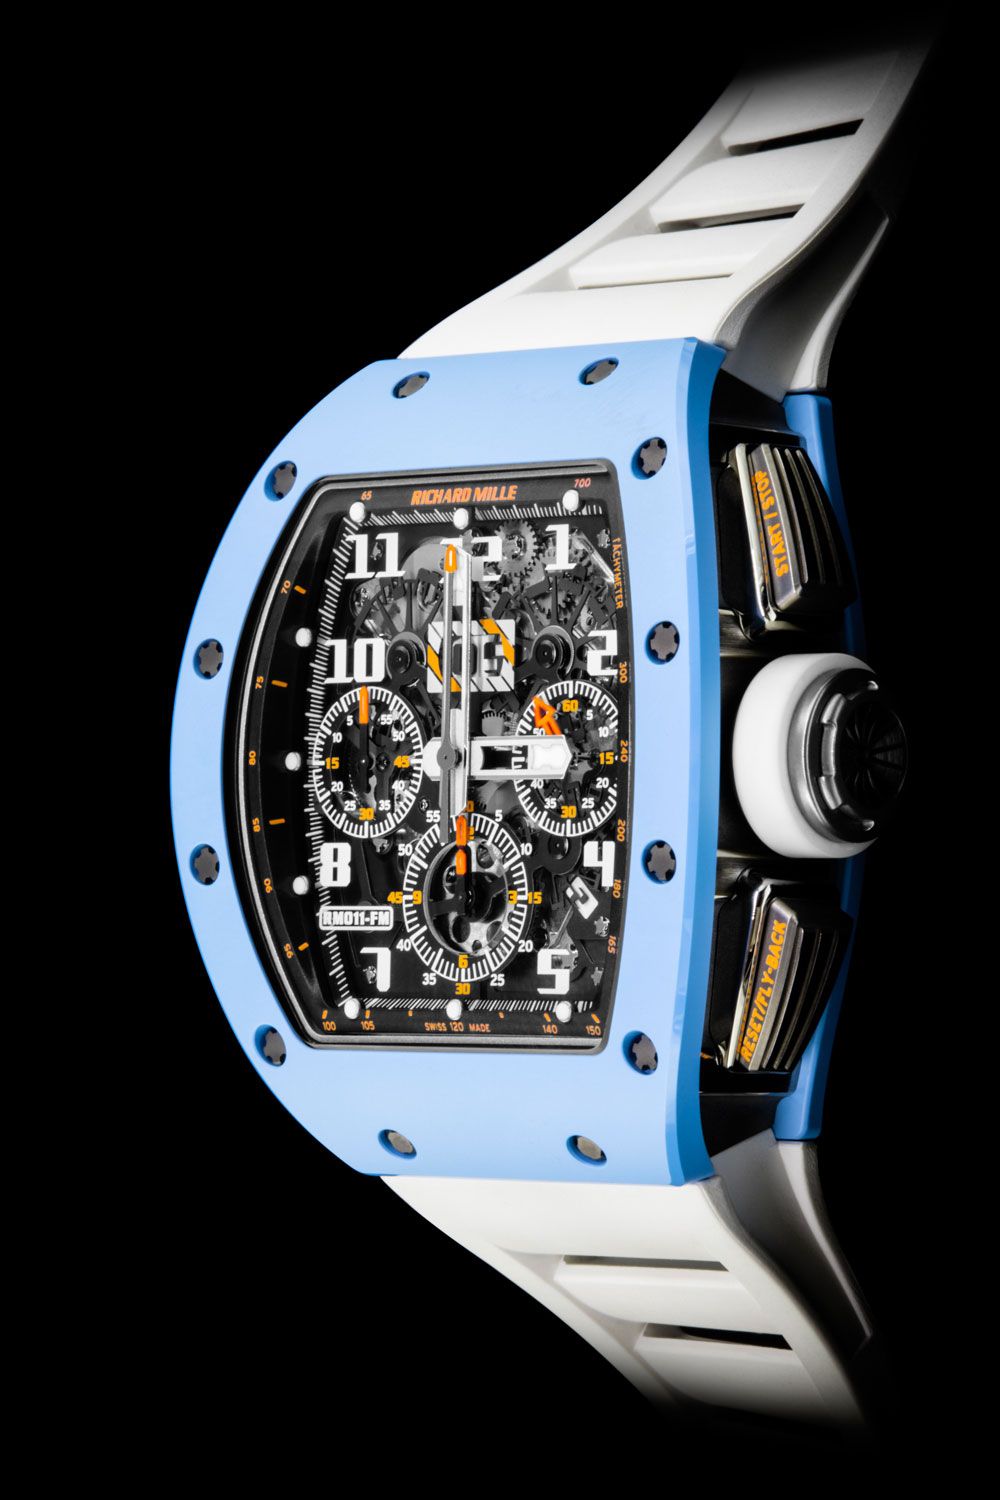 Richard Mille RM11-03 NTPT Automatic Flyback ChronographRichard Mille RM11-03 RG Automatic Flyback Chronograph